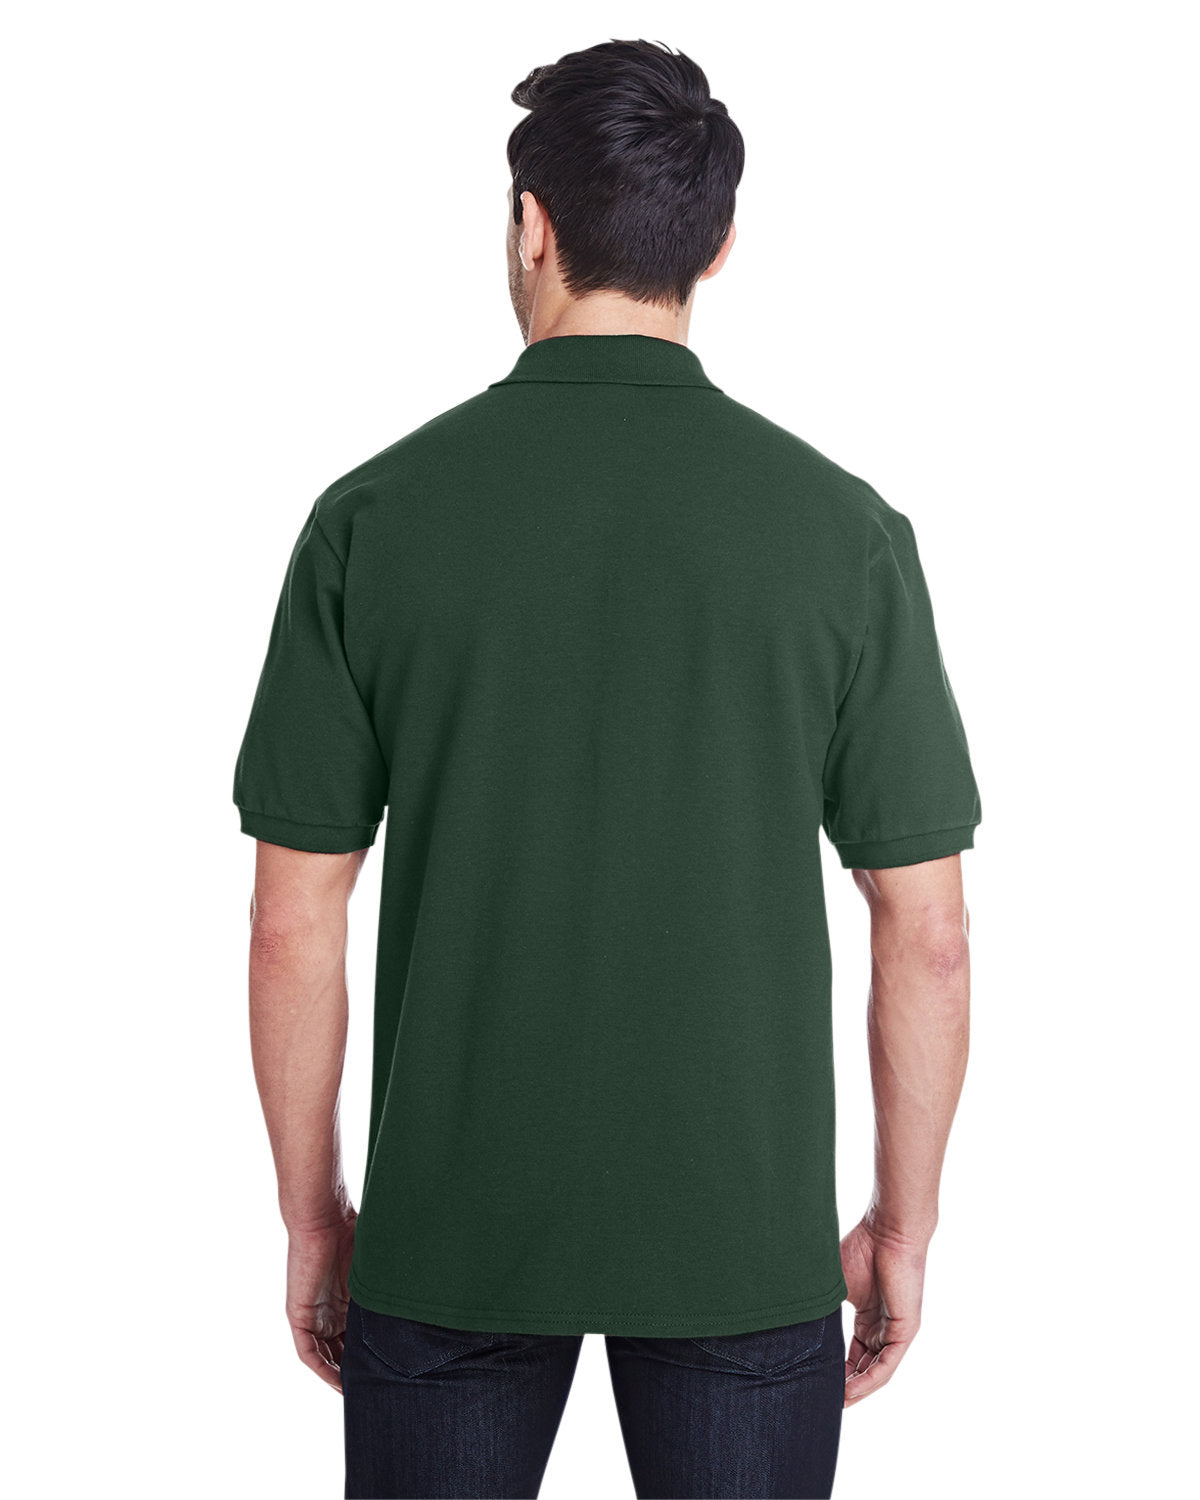 443MR-Jerzees-FOREST GREEN-Jerzees-Polos-2